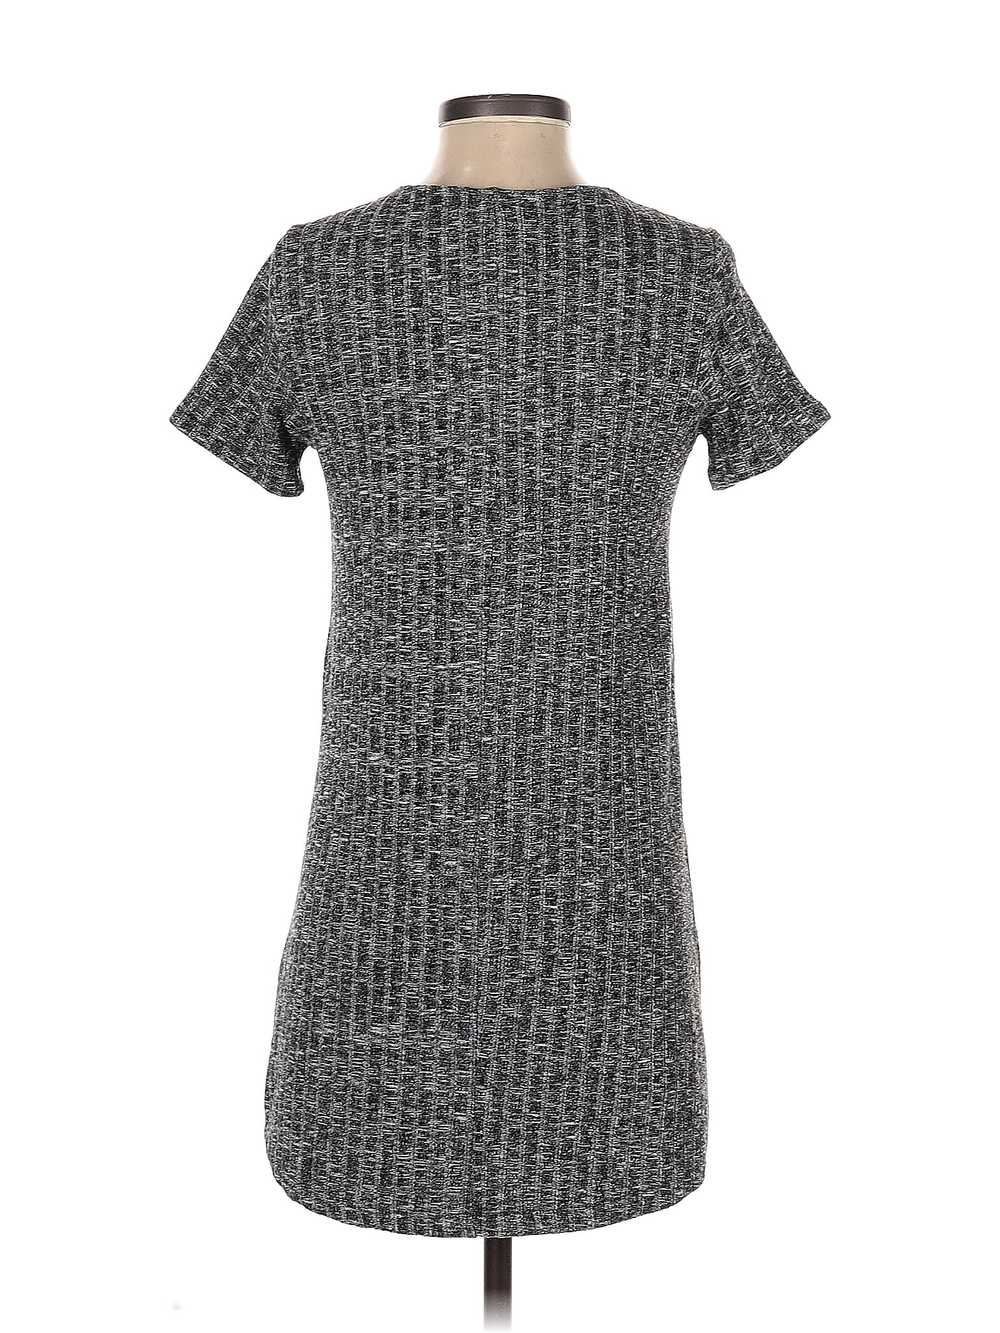 Abercrombie & Fitch Women Gray Casual Dress XS - image 2